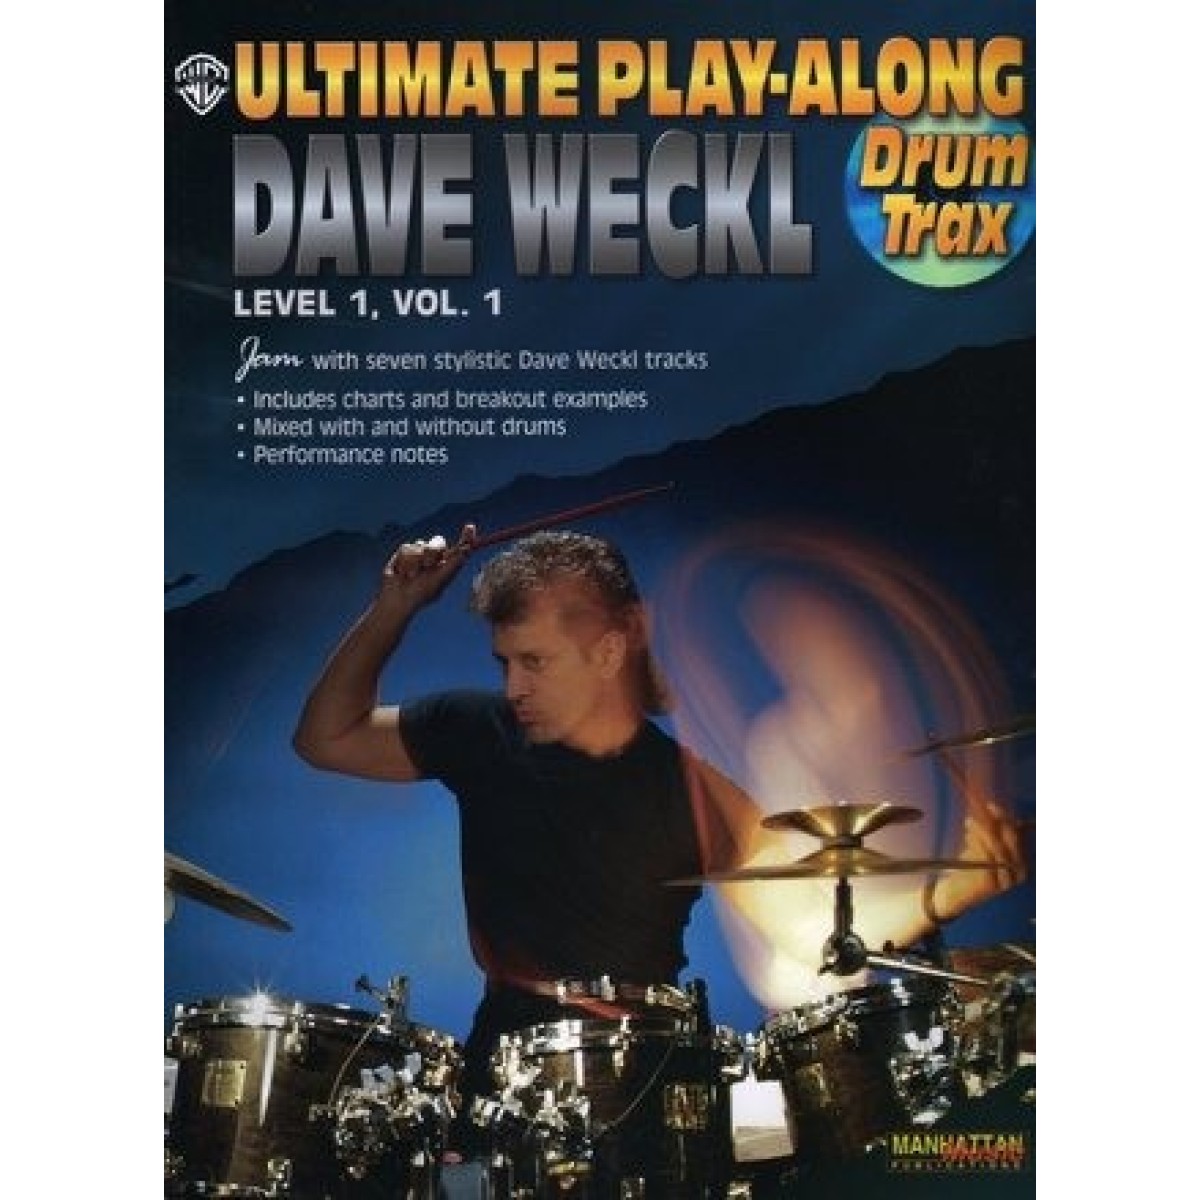 Ultimate Play-along Drum Trax: Dave Weckl, Level 1, Vol. 1